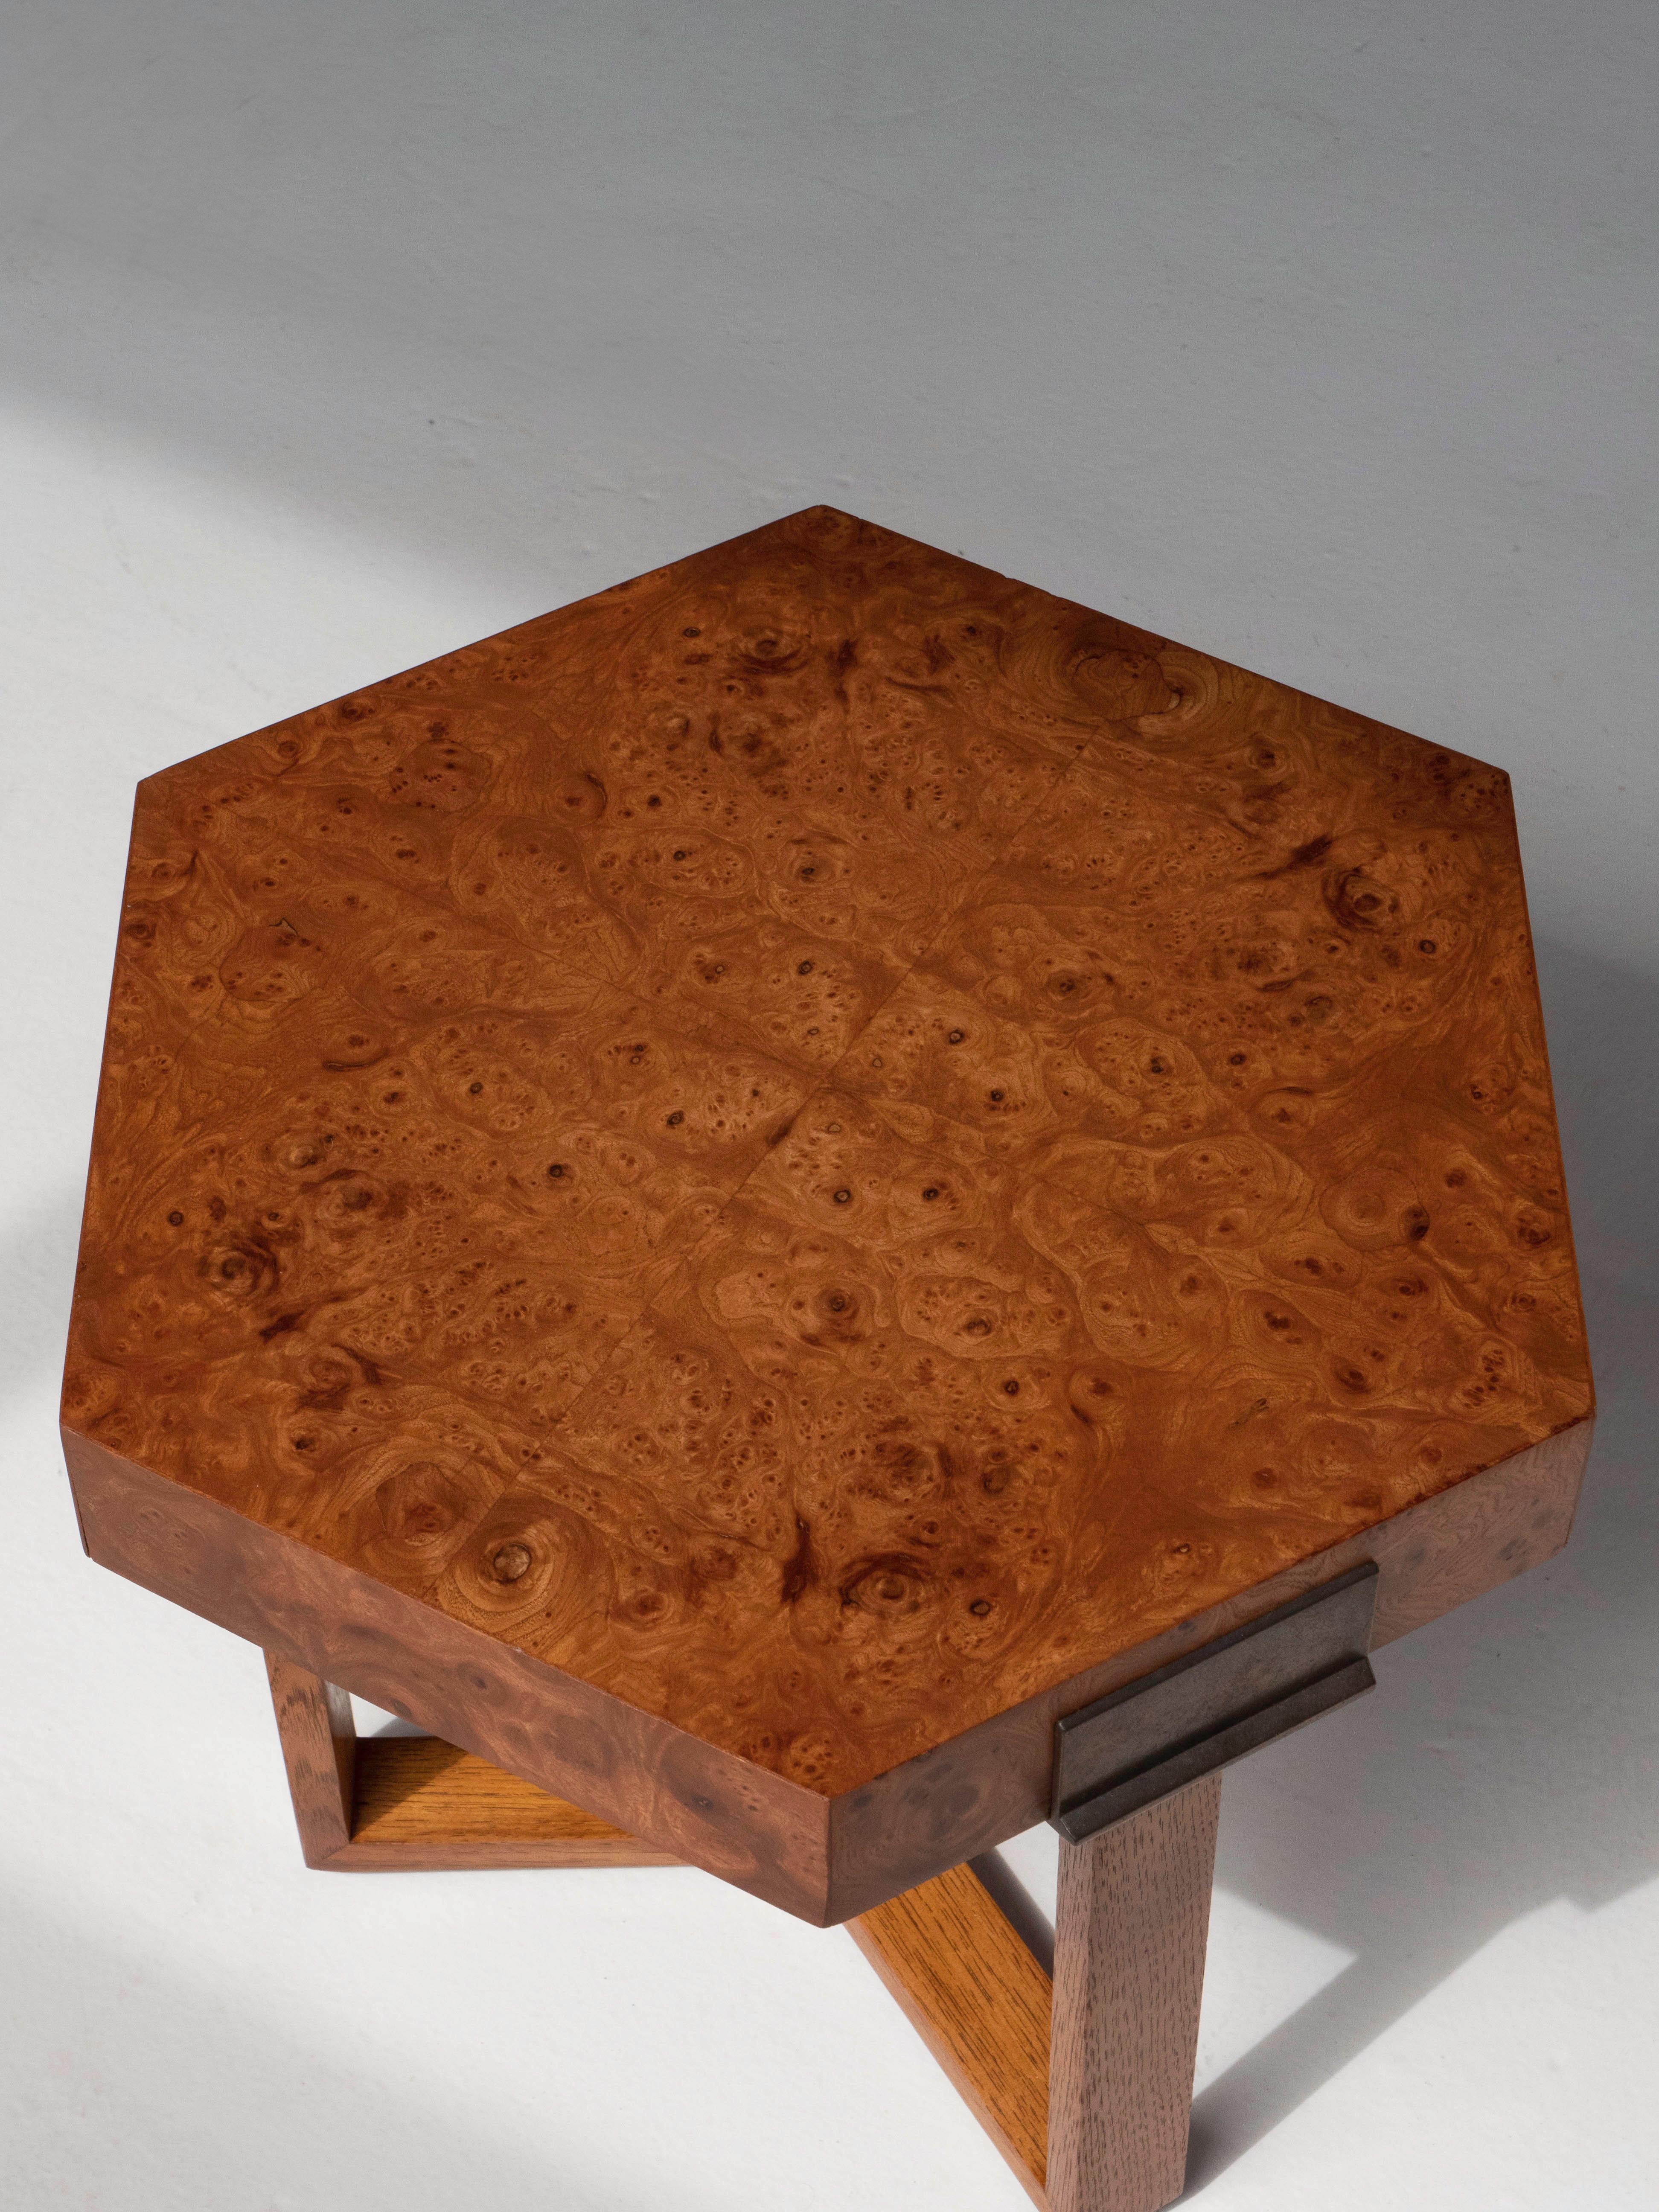 A hexagonal shaped side / cocktail table with a burlwood top and brass accents. The table is attributed to designer Milo Baughman for Bernhardt Furniture - Flair Division. Made circa 1970's. The table is in excellent condition and has been lightly